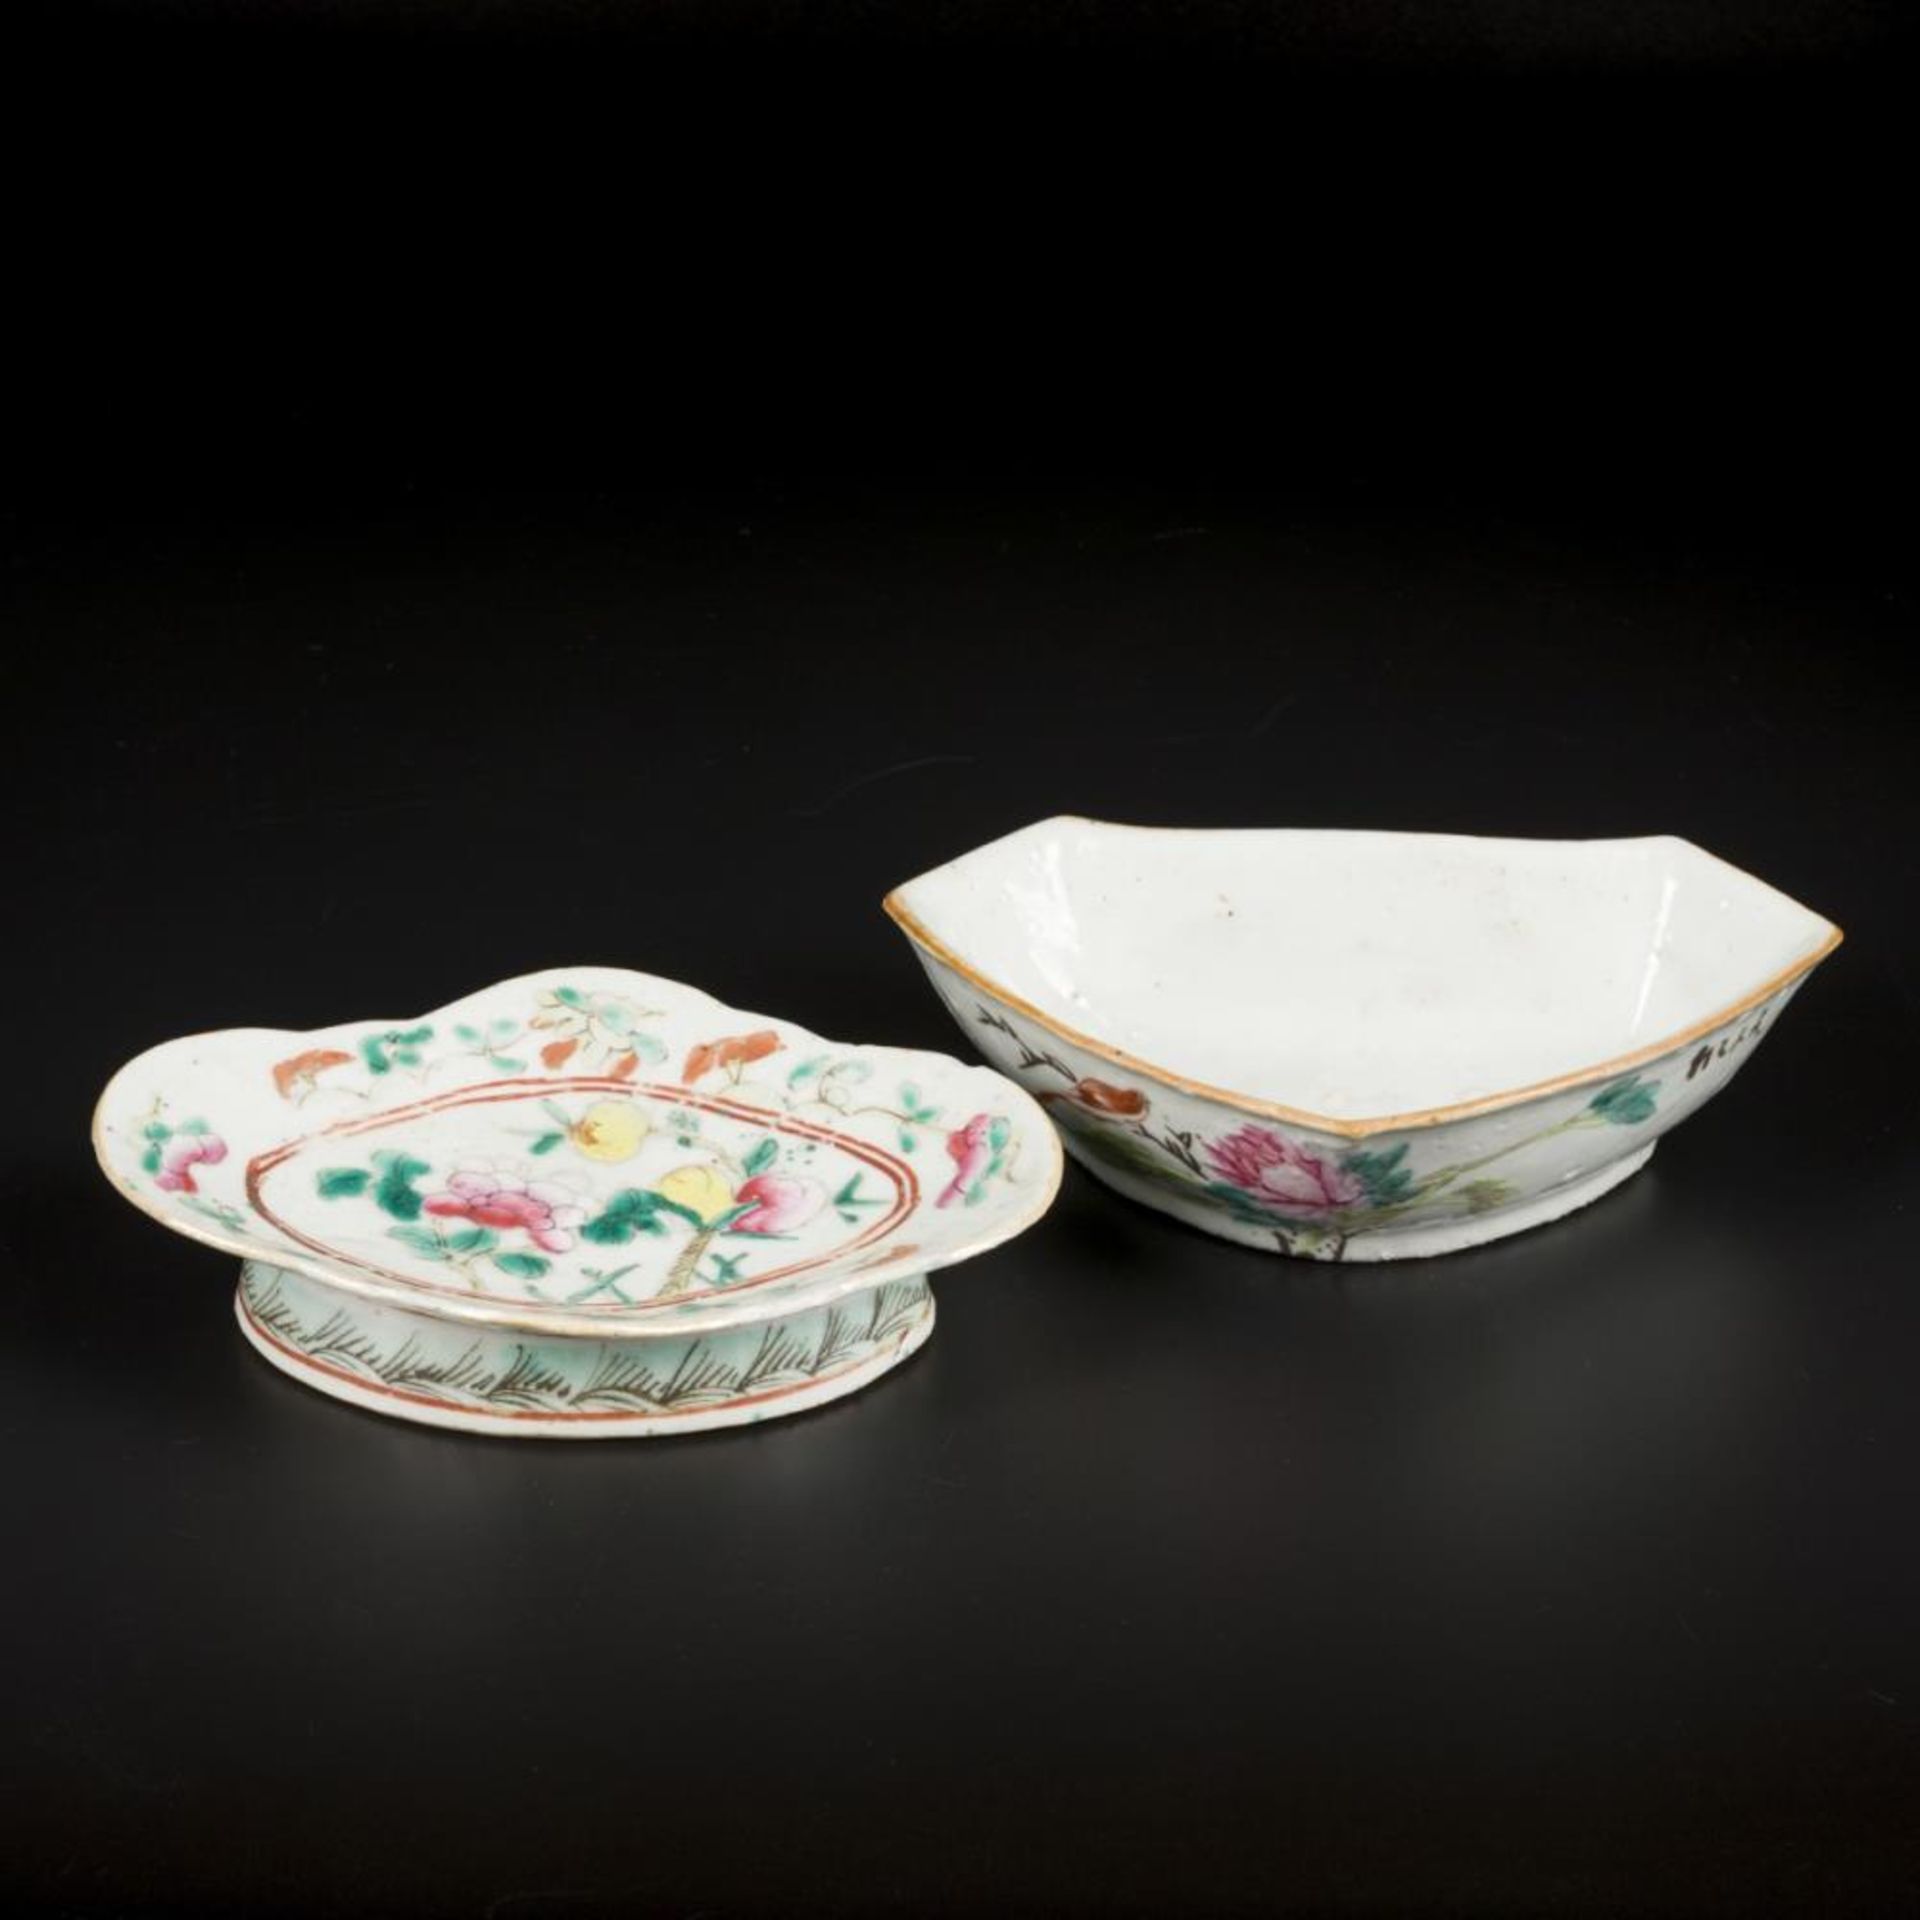 A lot of (2) porcelain bowls with floral decoration. China, late 19th century.